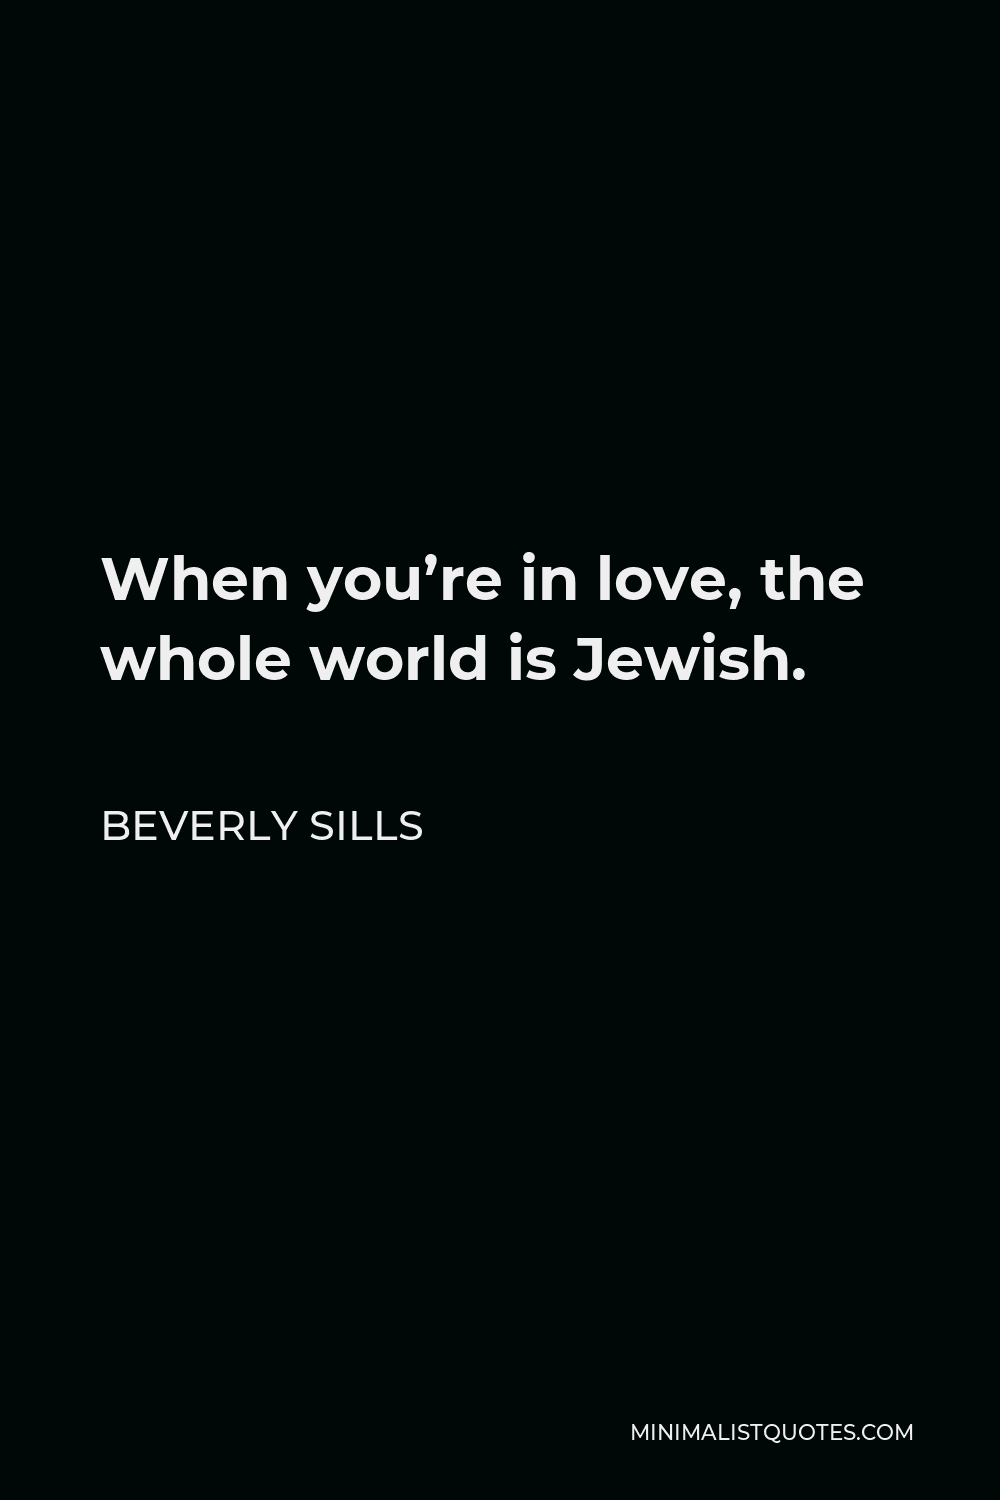 Beverly Sills Quote - When you’re in love, the whole world is Jewish.